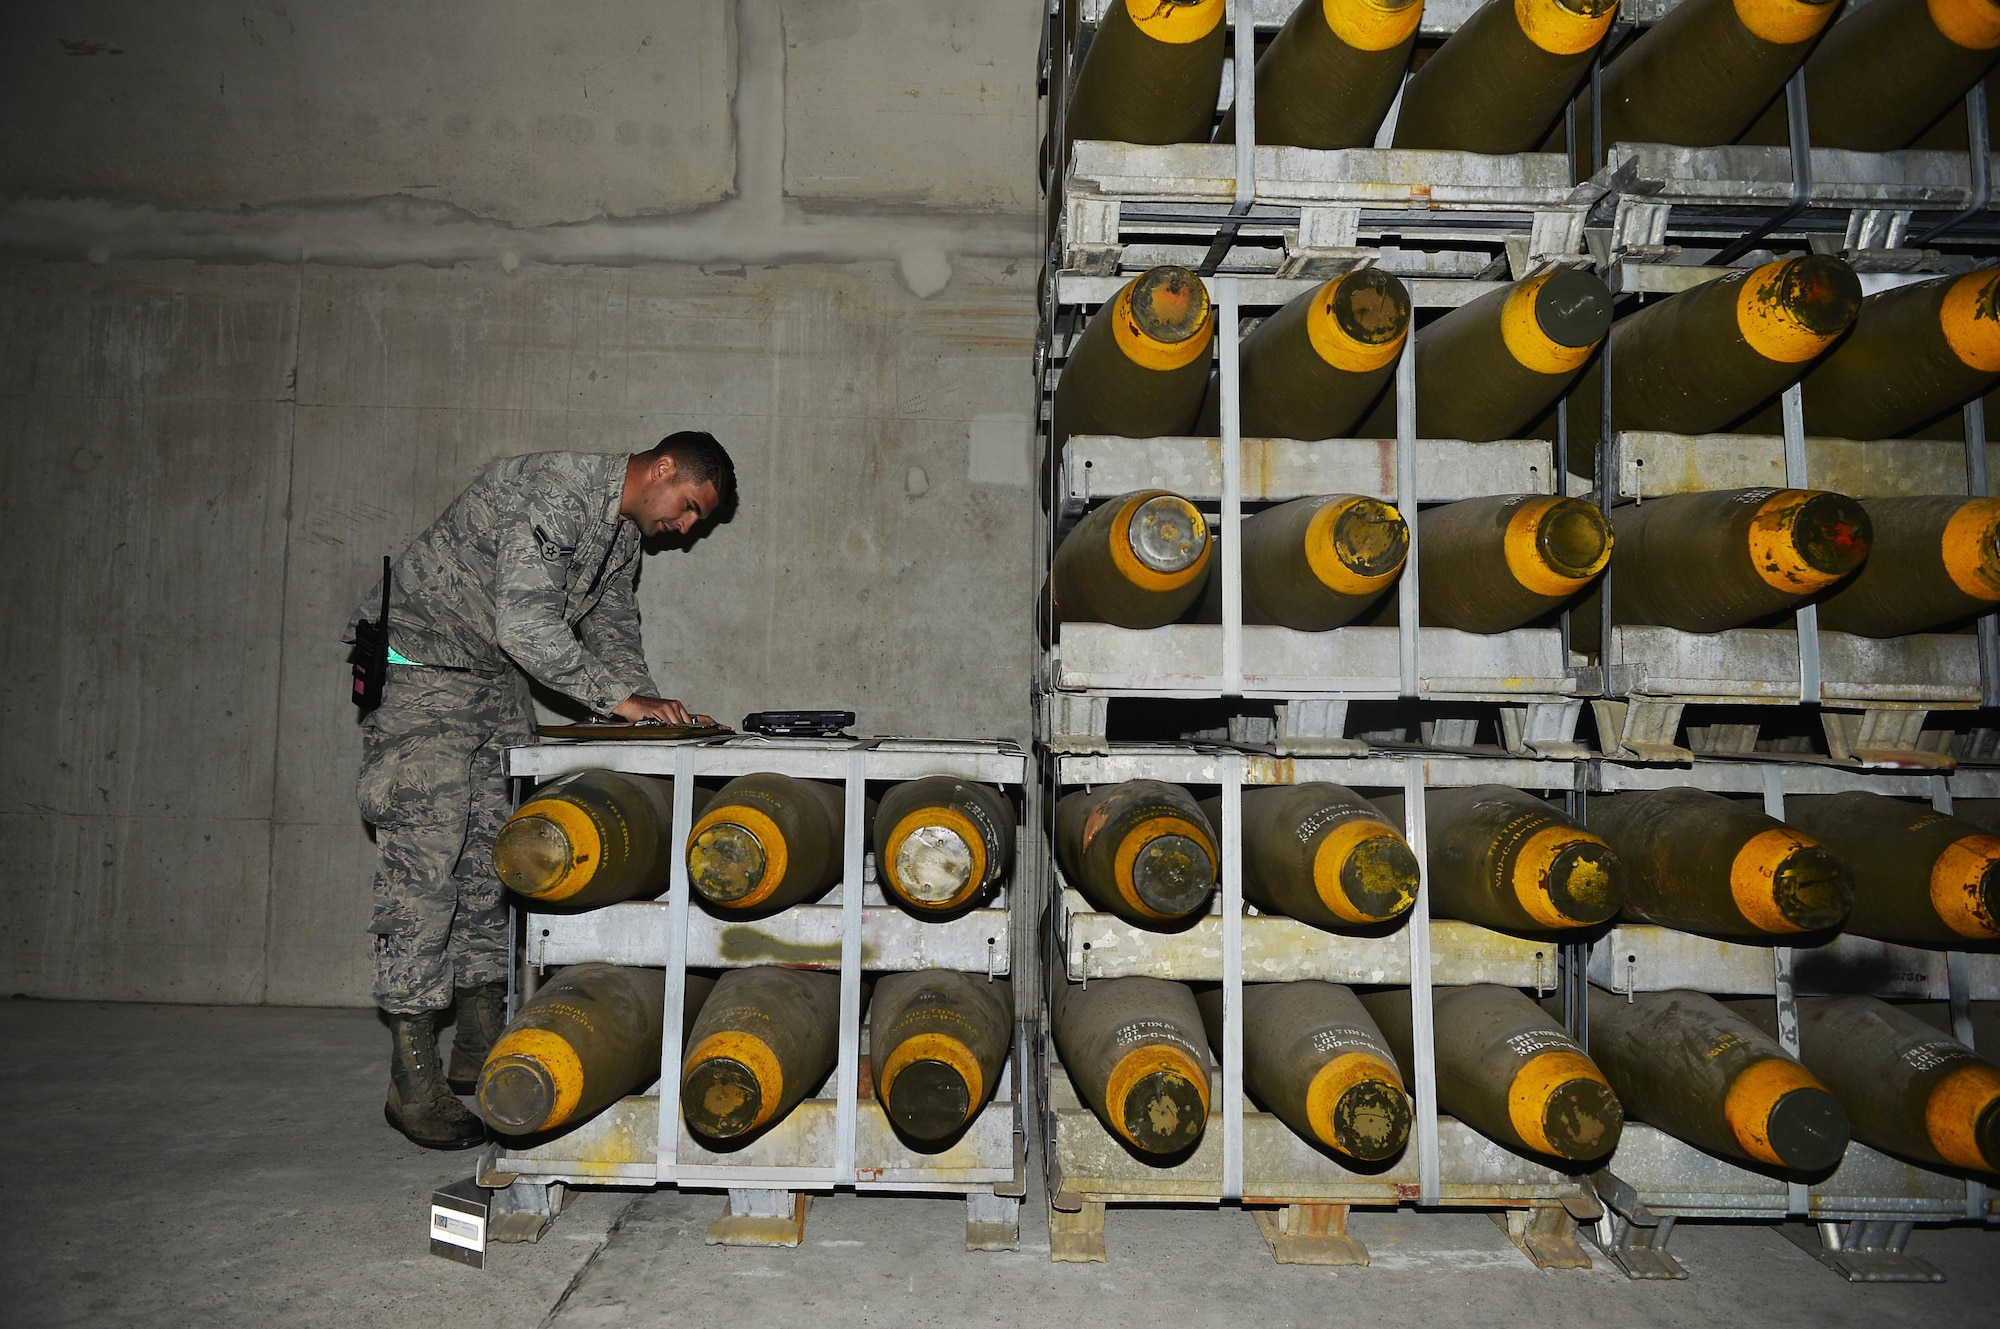 U.S. Air Force Airman 1st Class Taylor Szatko, 86th Munitions Squadron stockpile management crew chief, takes accountability of ammunition on Ramstein Air Base, Germany, Sept. 19, 2017. Munitions Airmen, commonly called ammo troops, are responsible for receiving, inspecting, and storing ammunition before shipping them to their respective users. (U.S. Air Force photo by Airman 1st Class Joshua Magbanua)